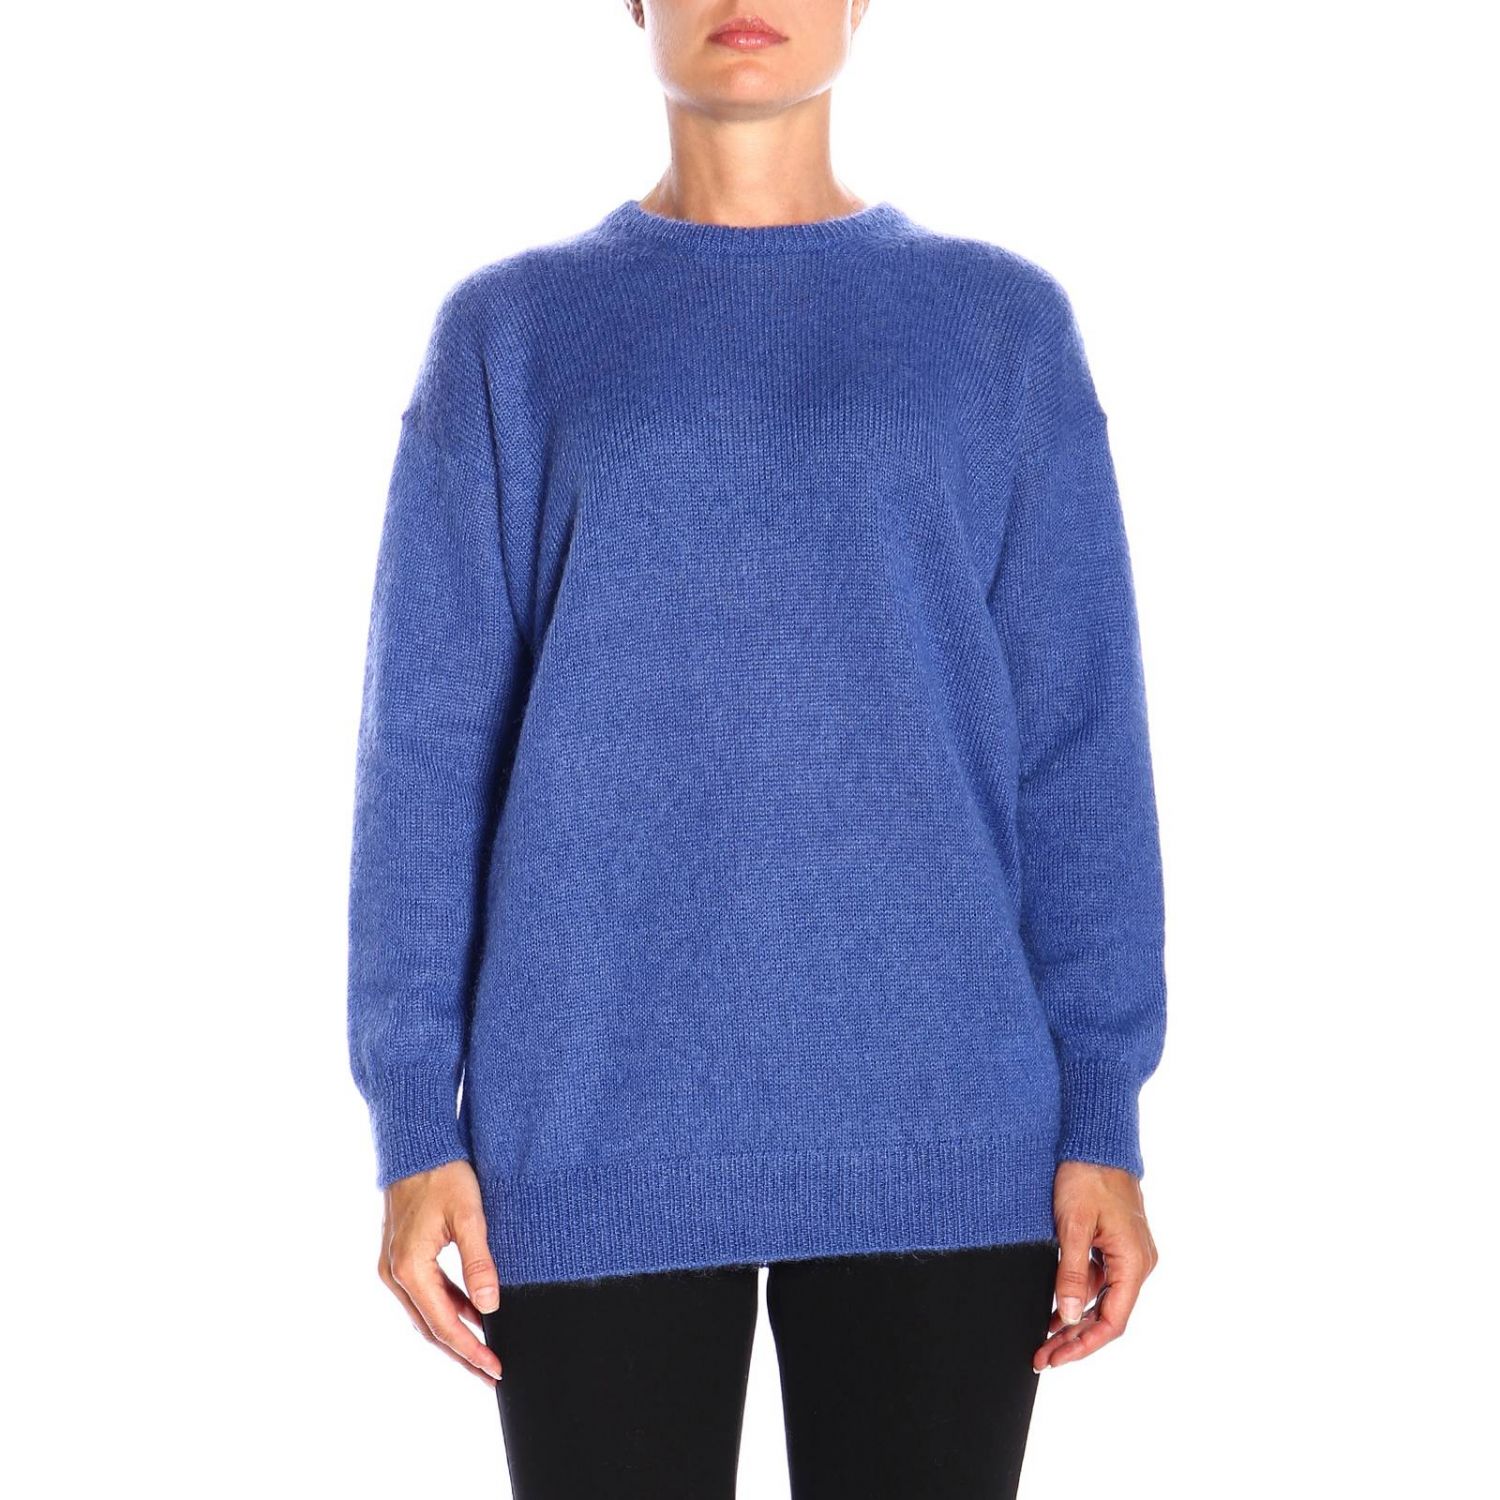 Max Mara Outlet: Relax Pullover in mohair wool | Sweater Max Mara Women ...